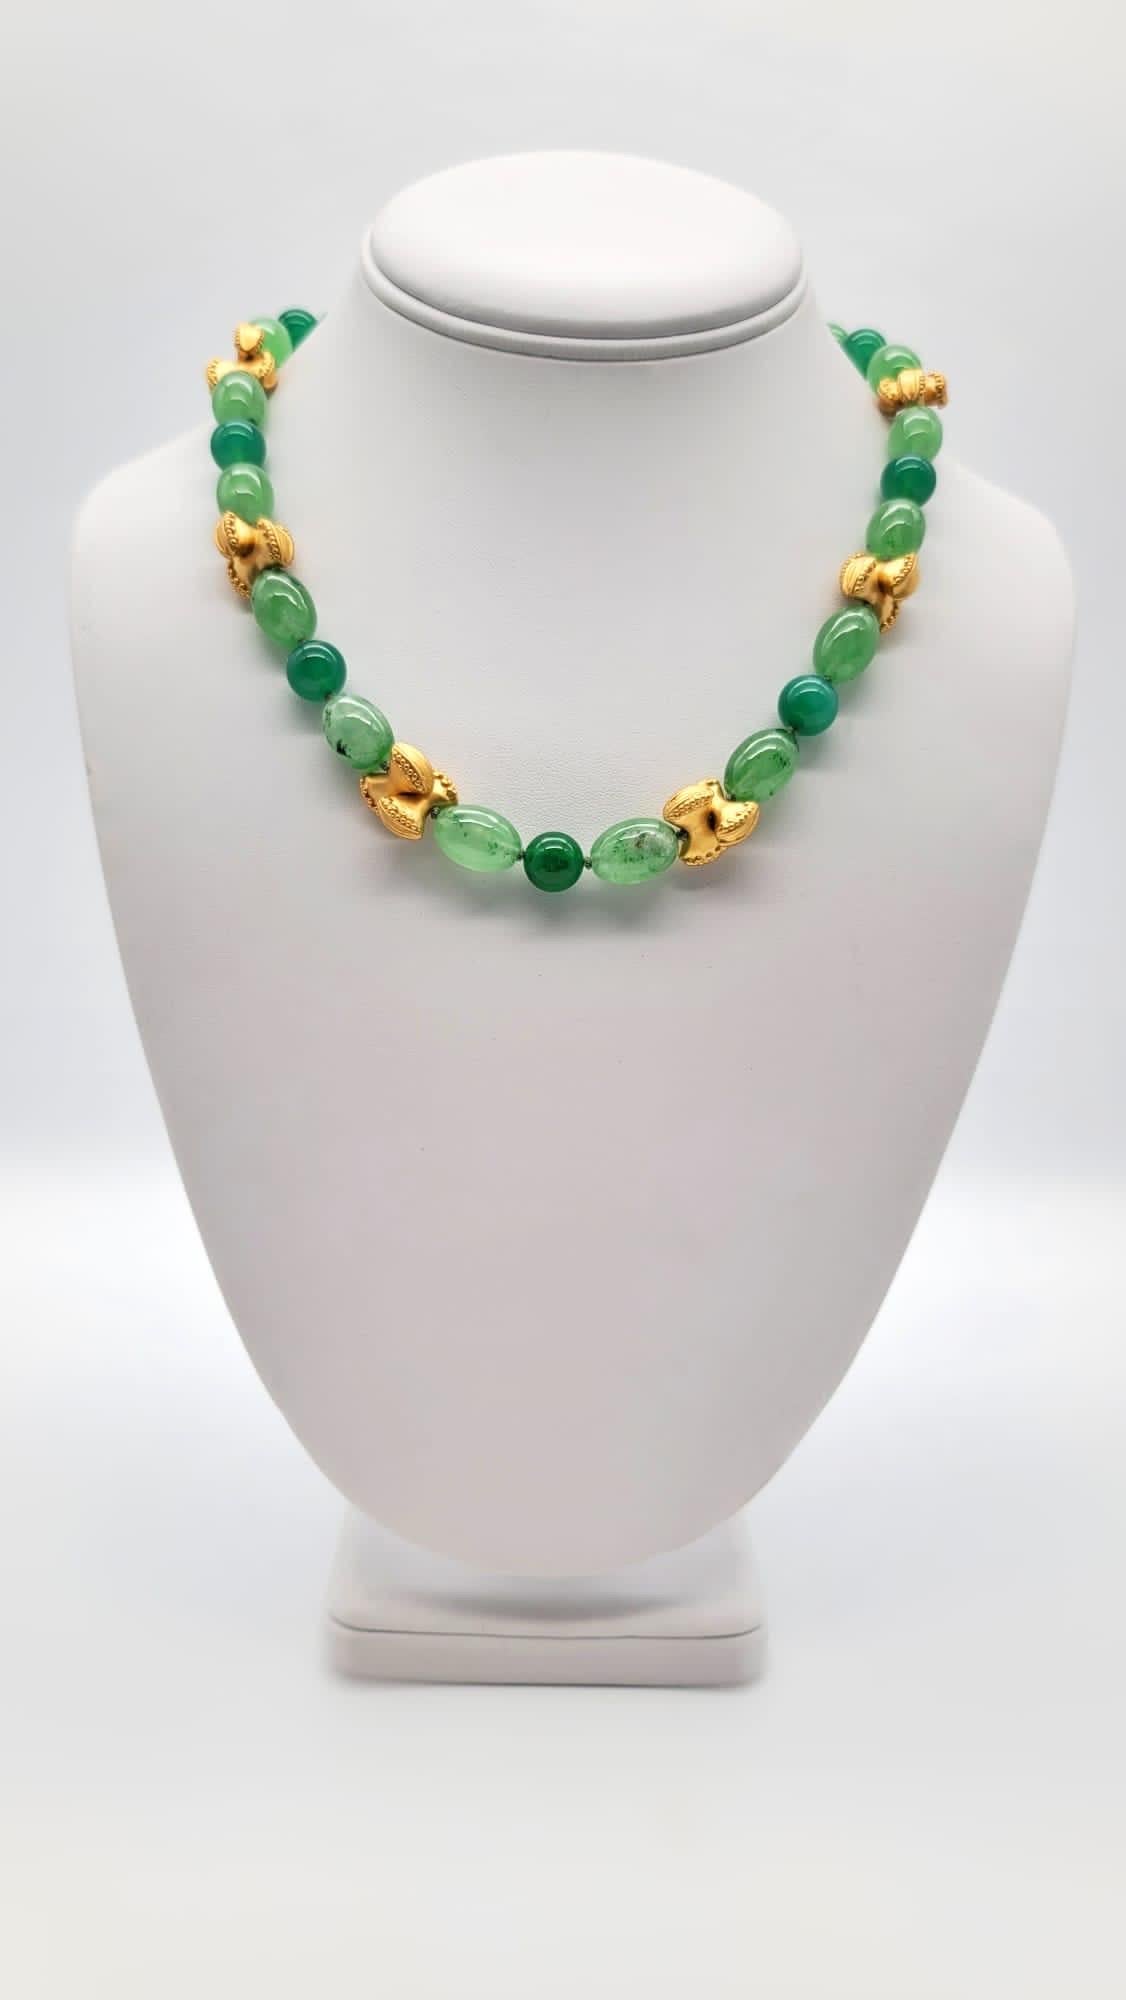 One-of-a-Kind

Lucky Jade in two shapes and shades to double the charm.
Bright green highly sought after 8m.m Apple jade round beads and paler green translucent oval beads. The necklace is accented with elegant vermeil bow ties and an elegant